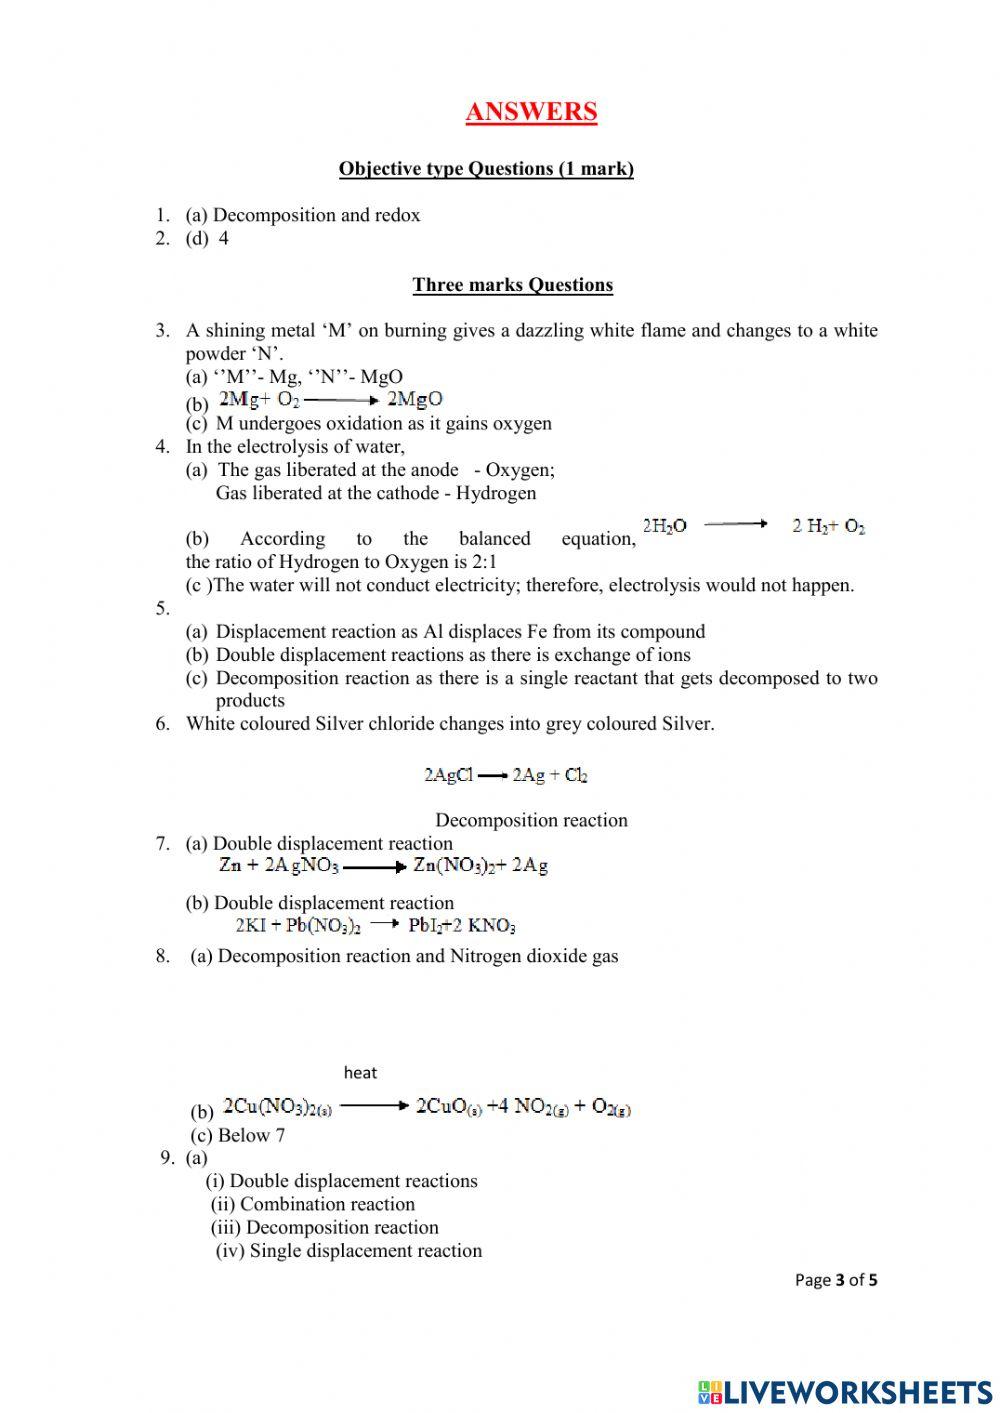 Class 10 -science-chemistry- chemical reactions and equations -ws -jenesha